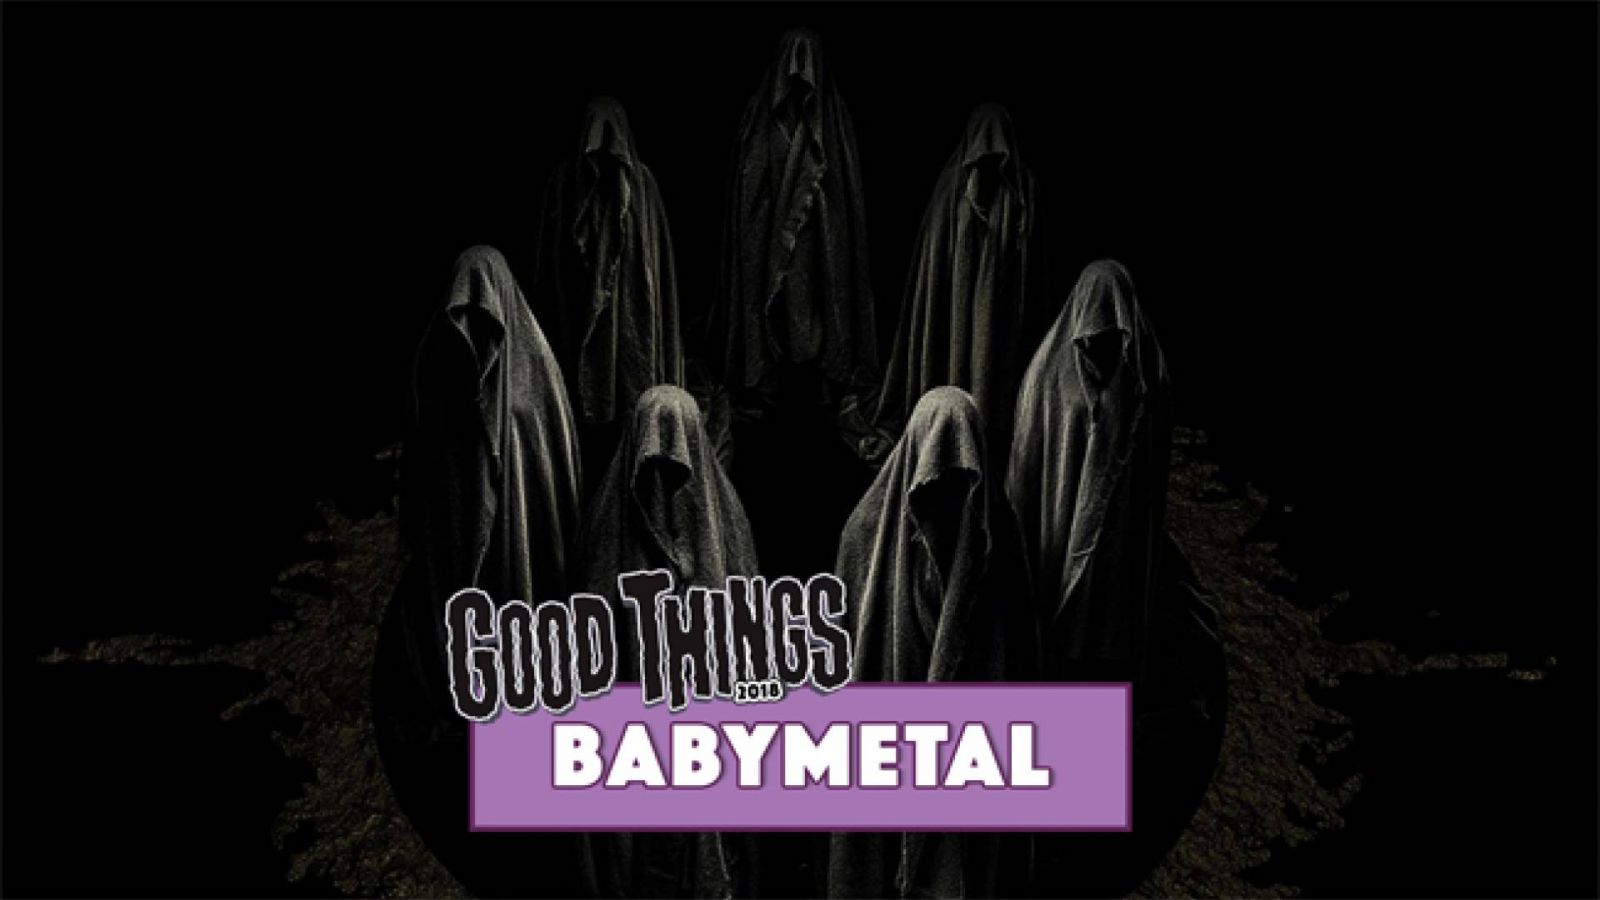 BABYMETAL to Make Australian Debut at Good Things Festival © AMUSE INC. All rights reserved.